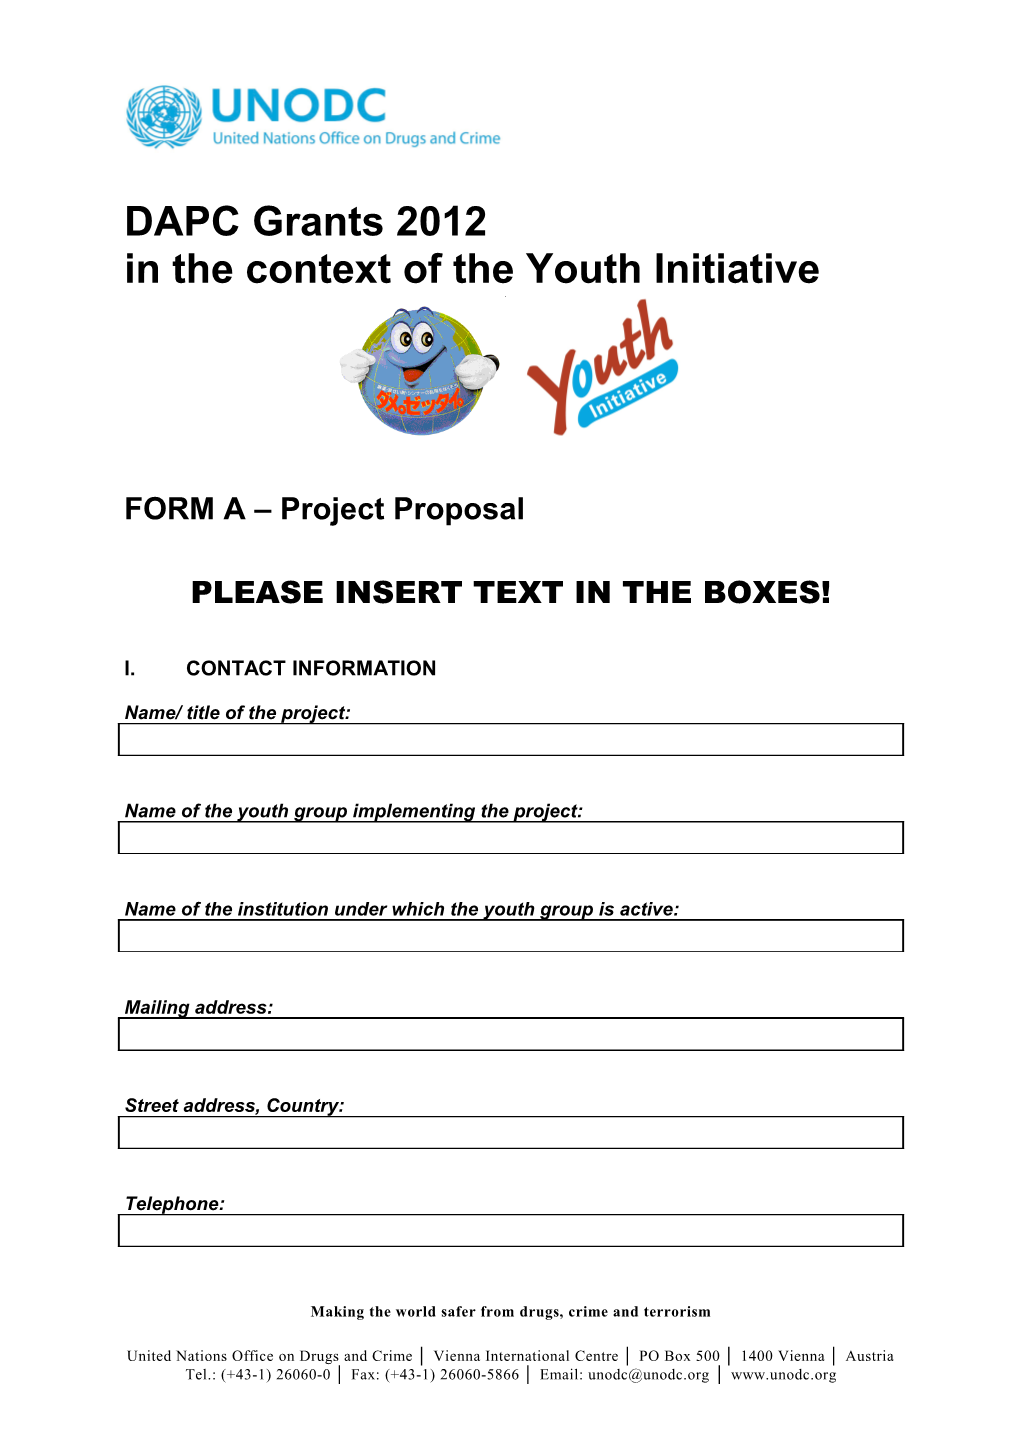 In the Context of the Youth Initiative